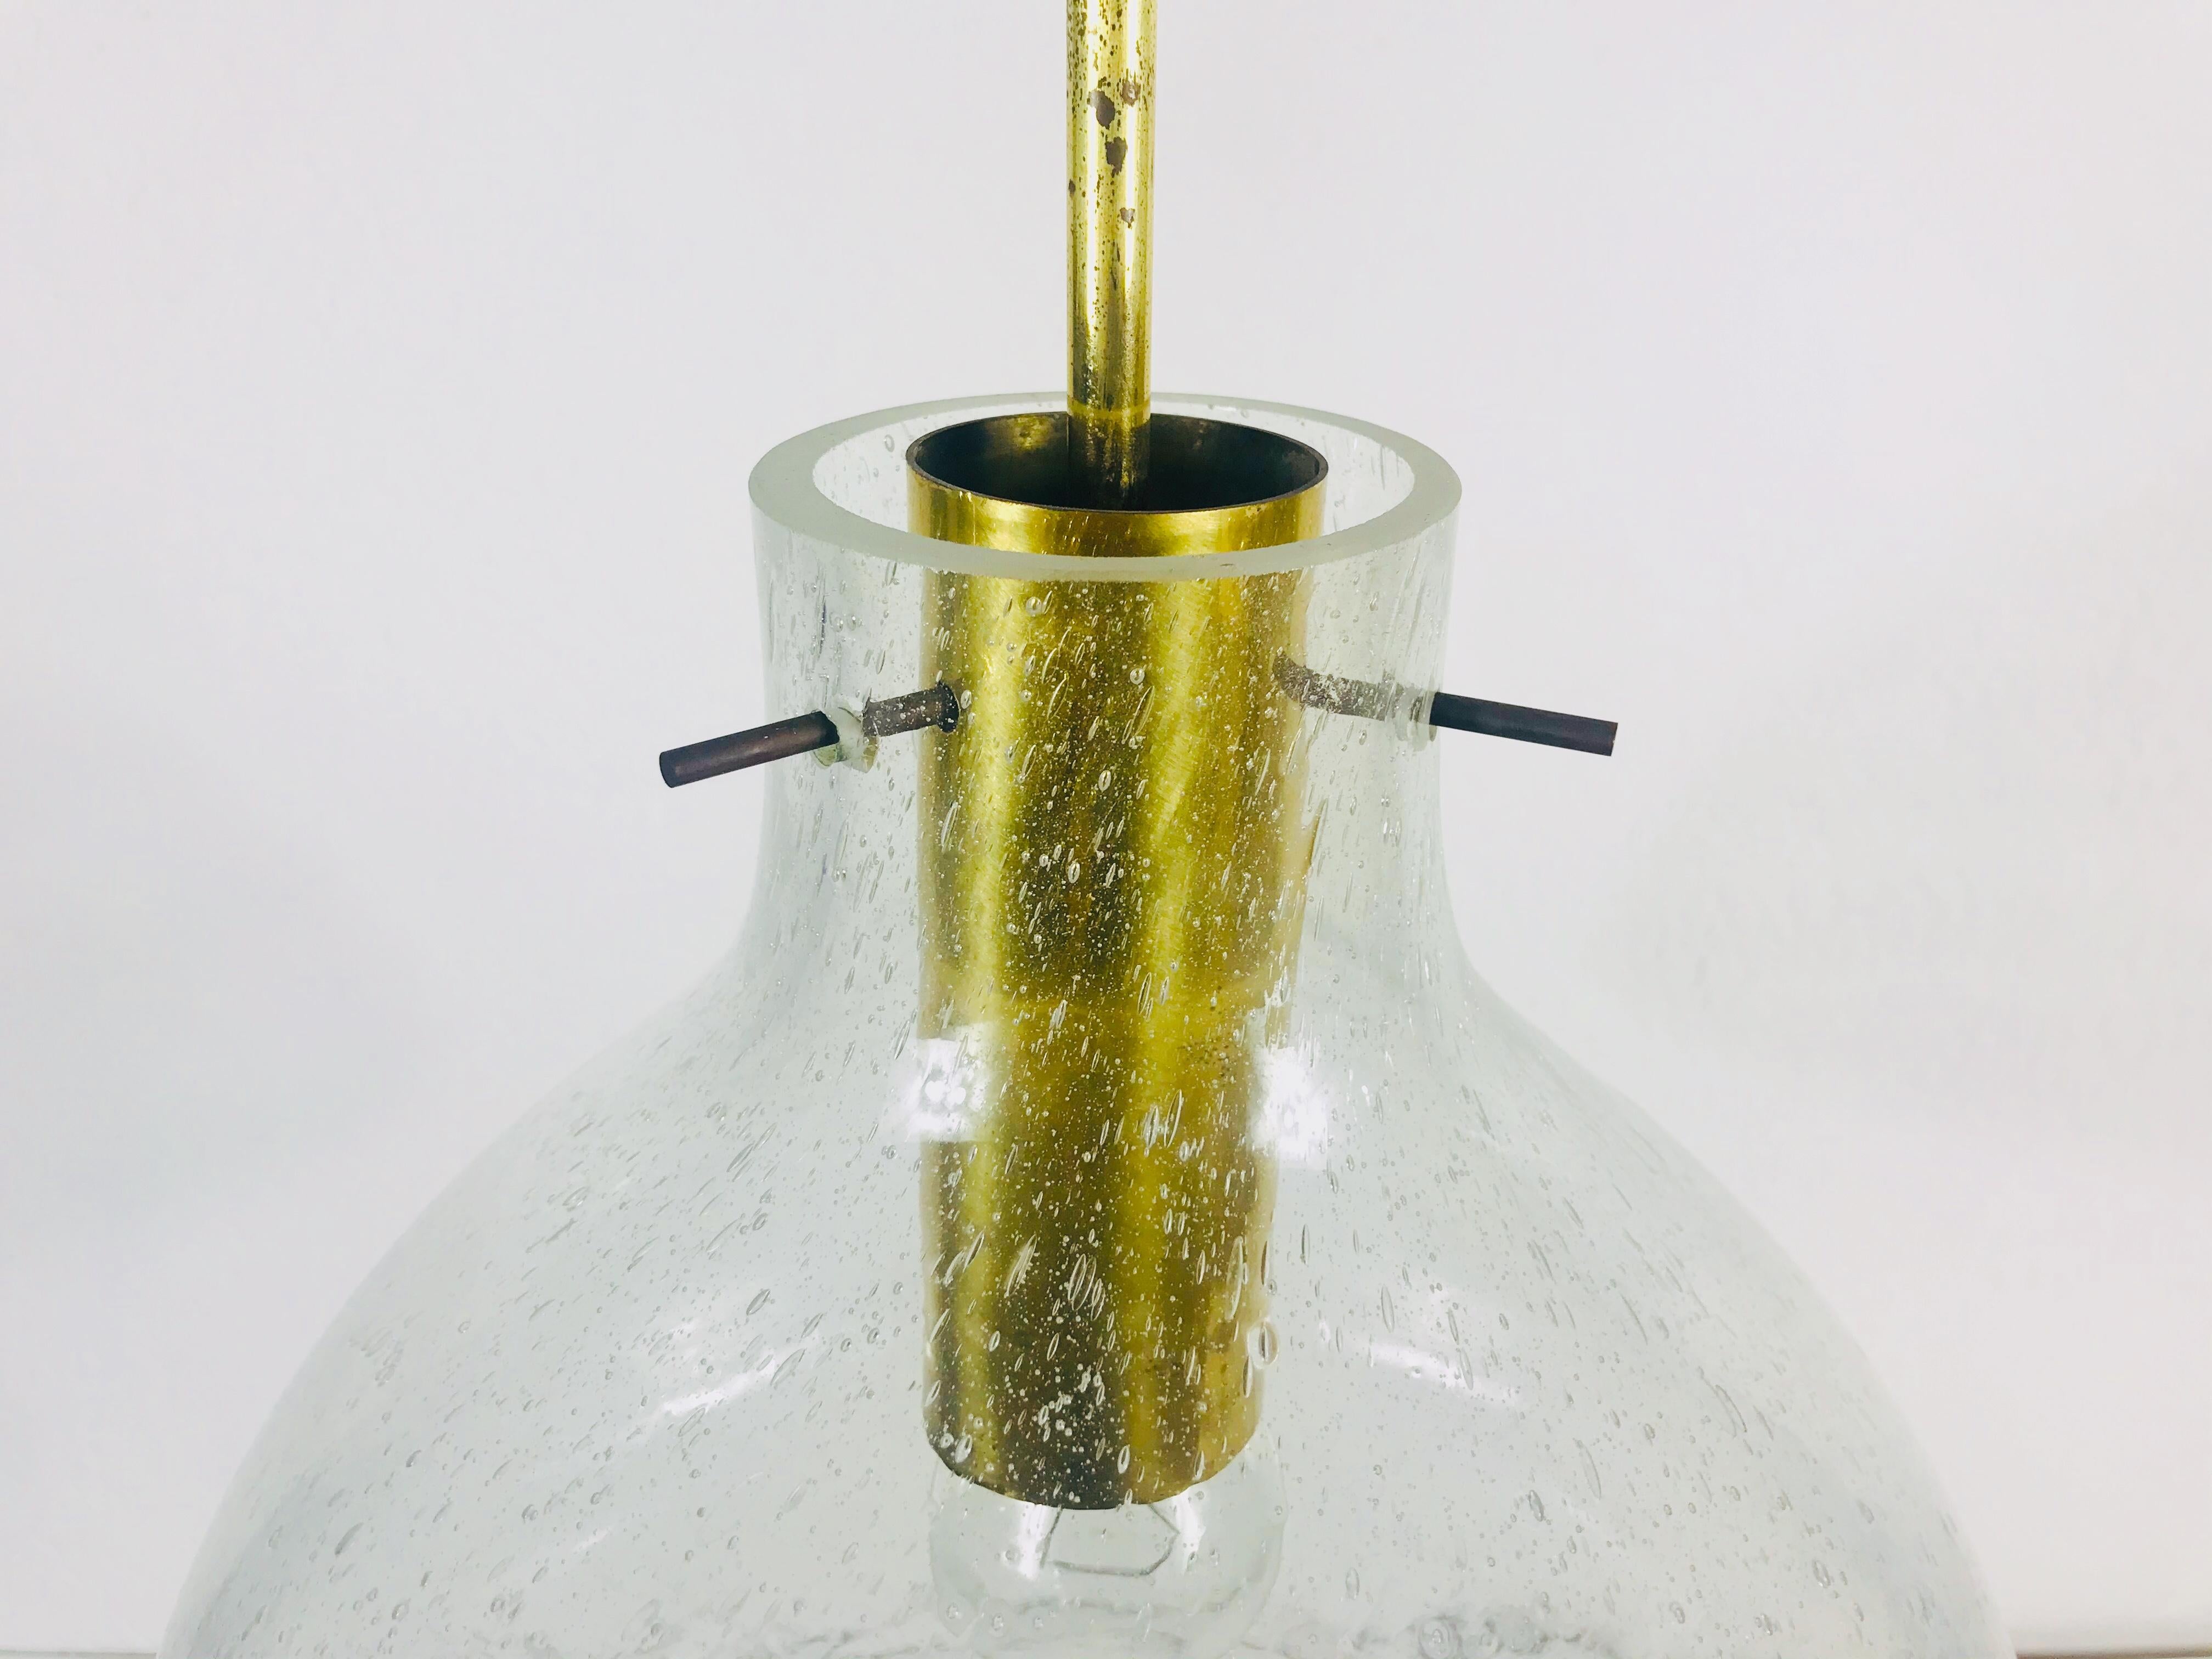 German Rare Doria Midcentury Brass and Ice Glass Pendant Lamp, 1960s For Sale